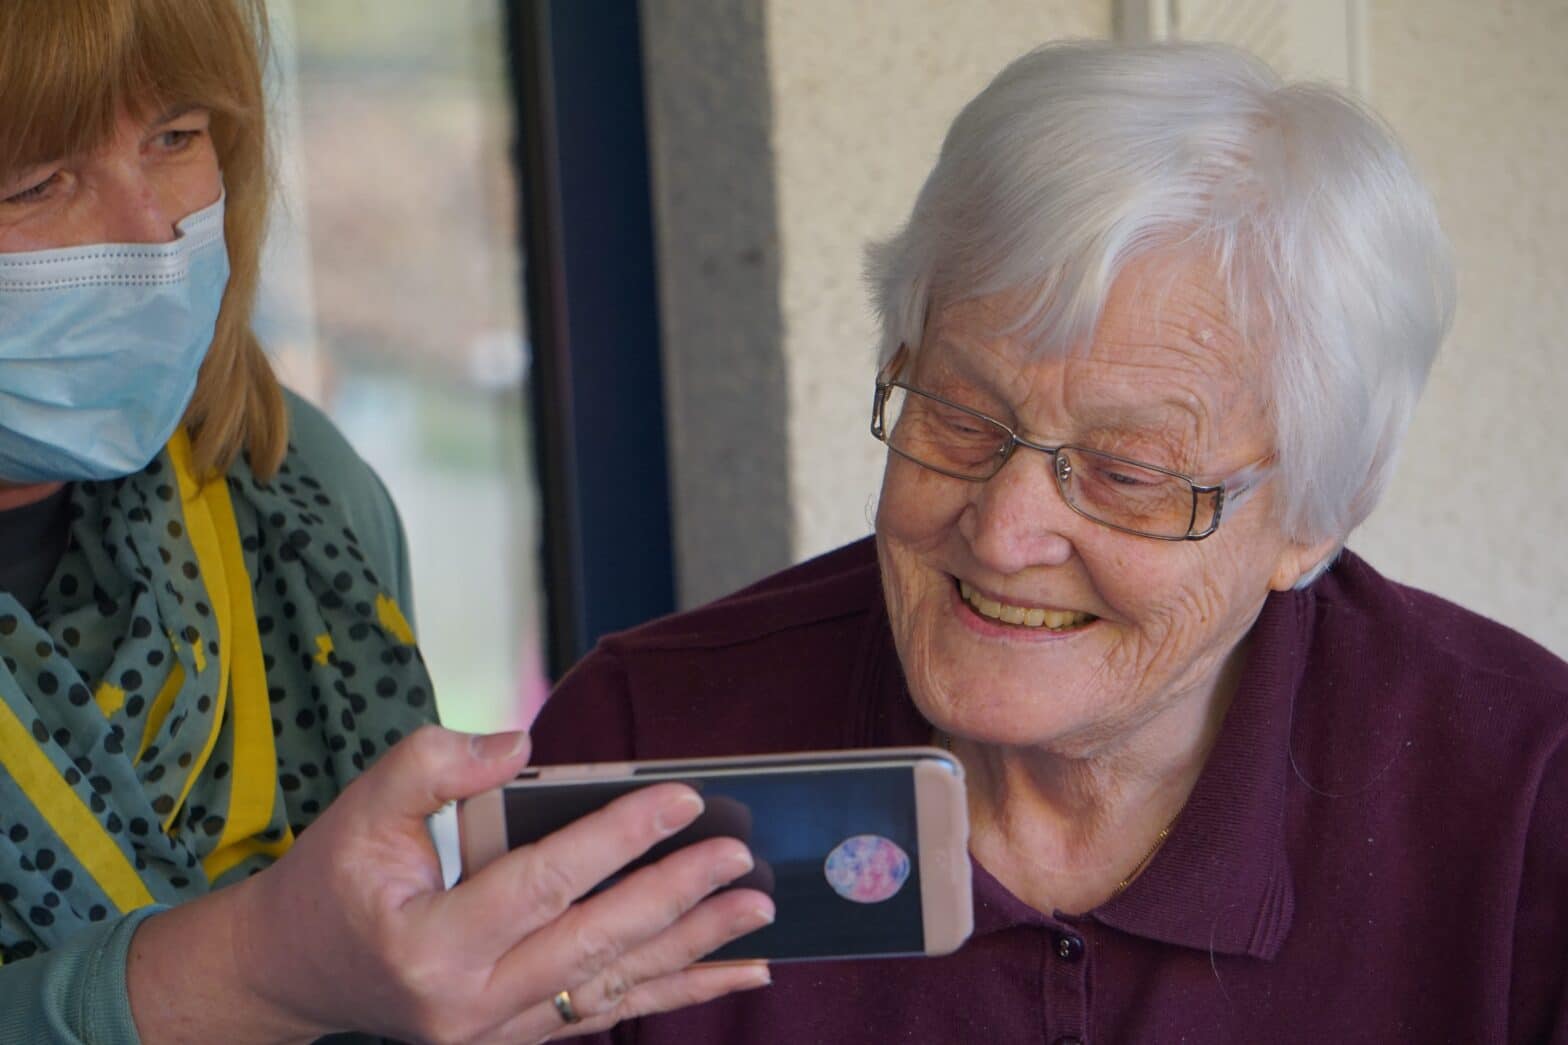 senior watching video on a phone